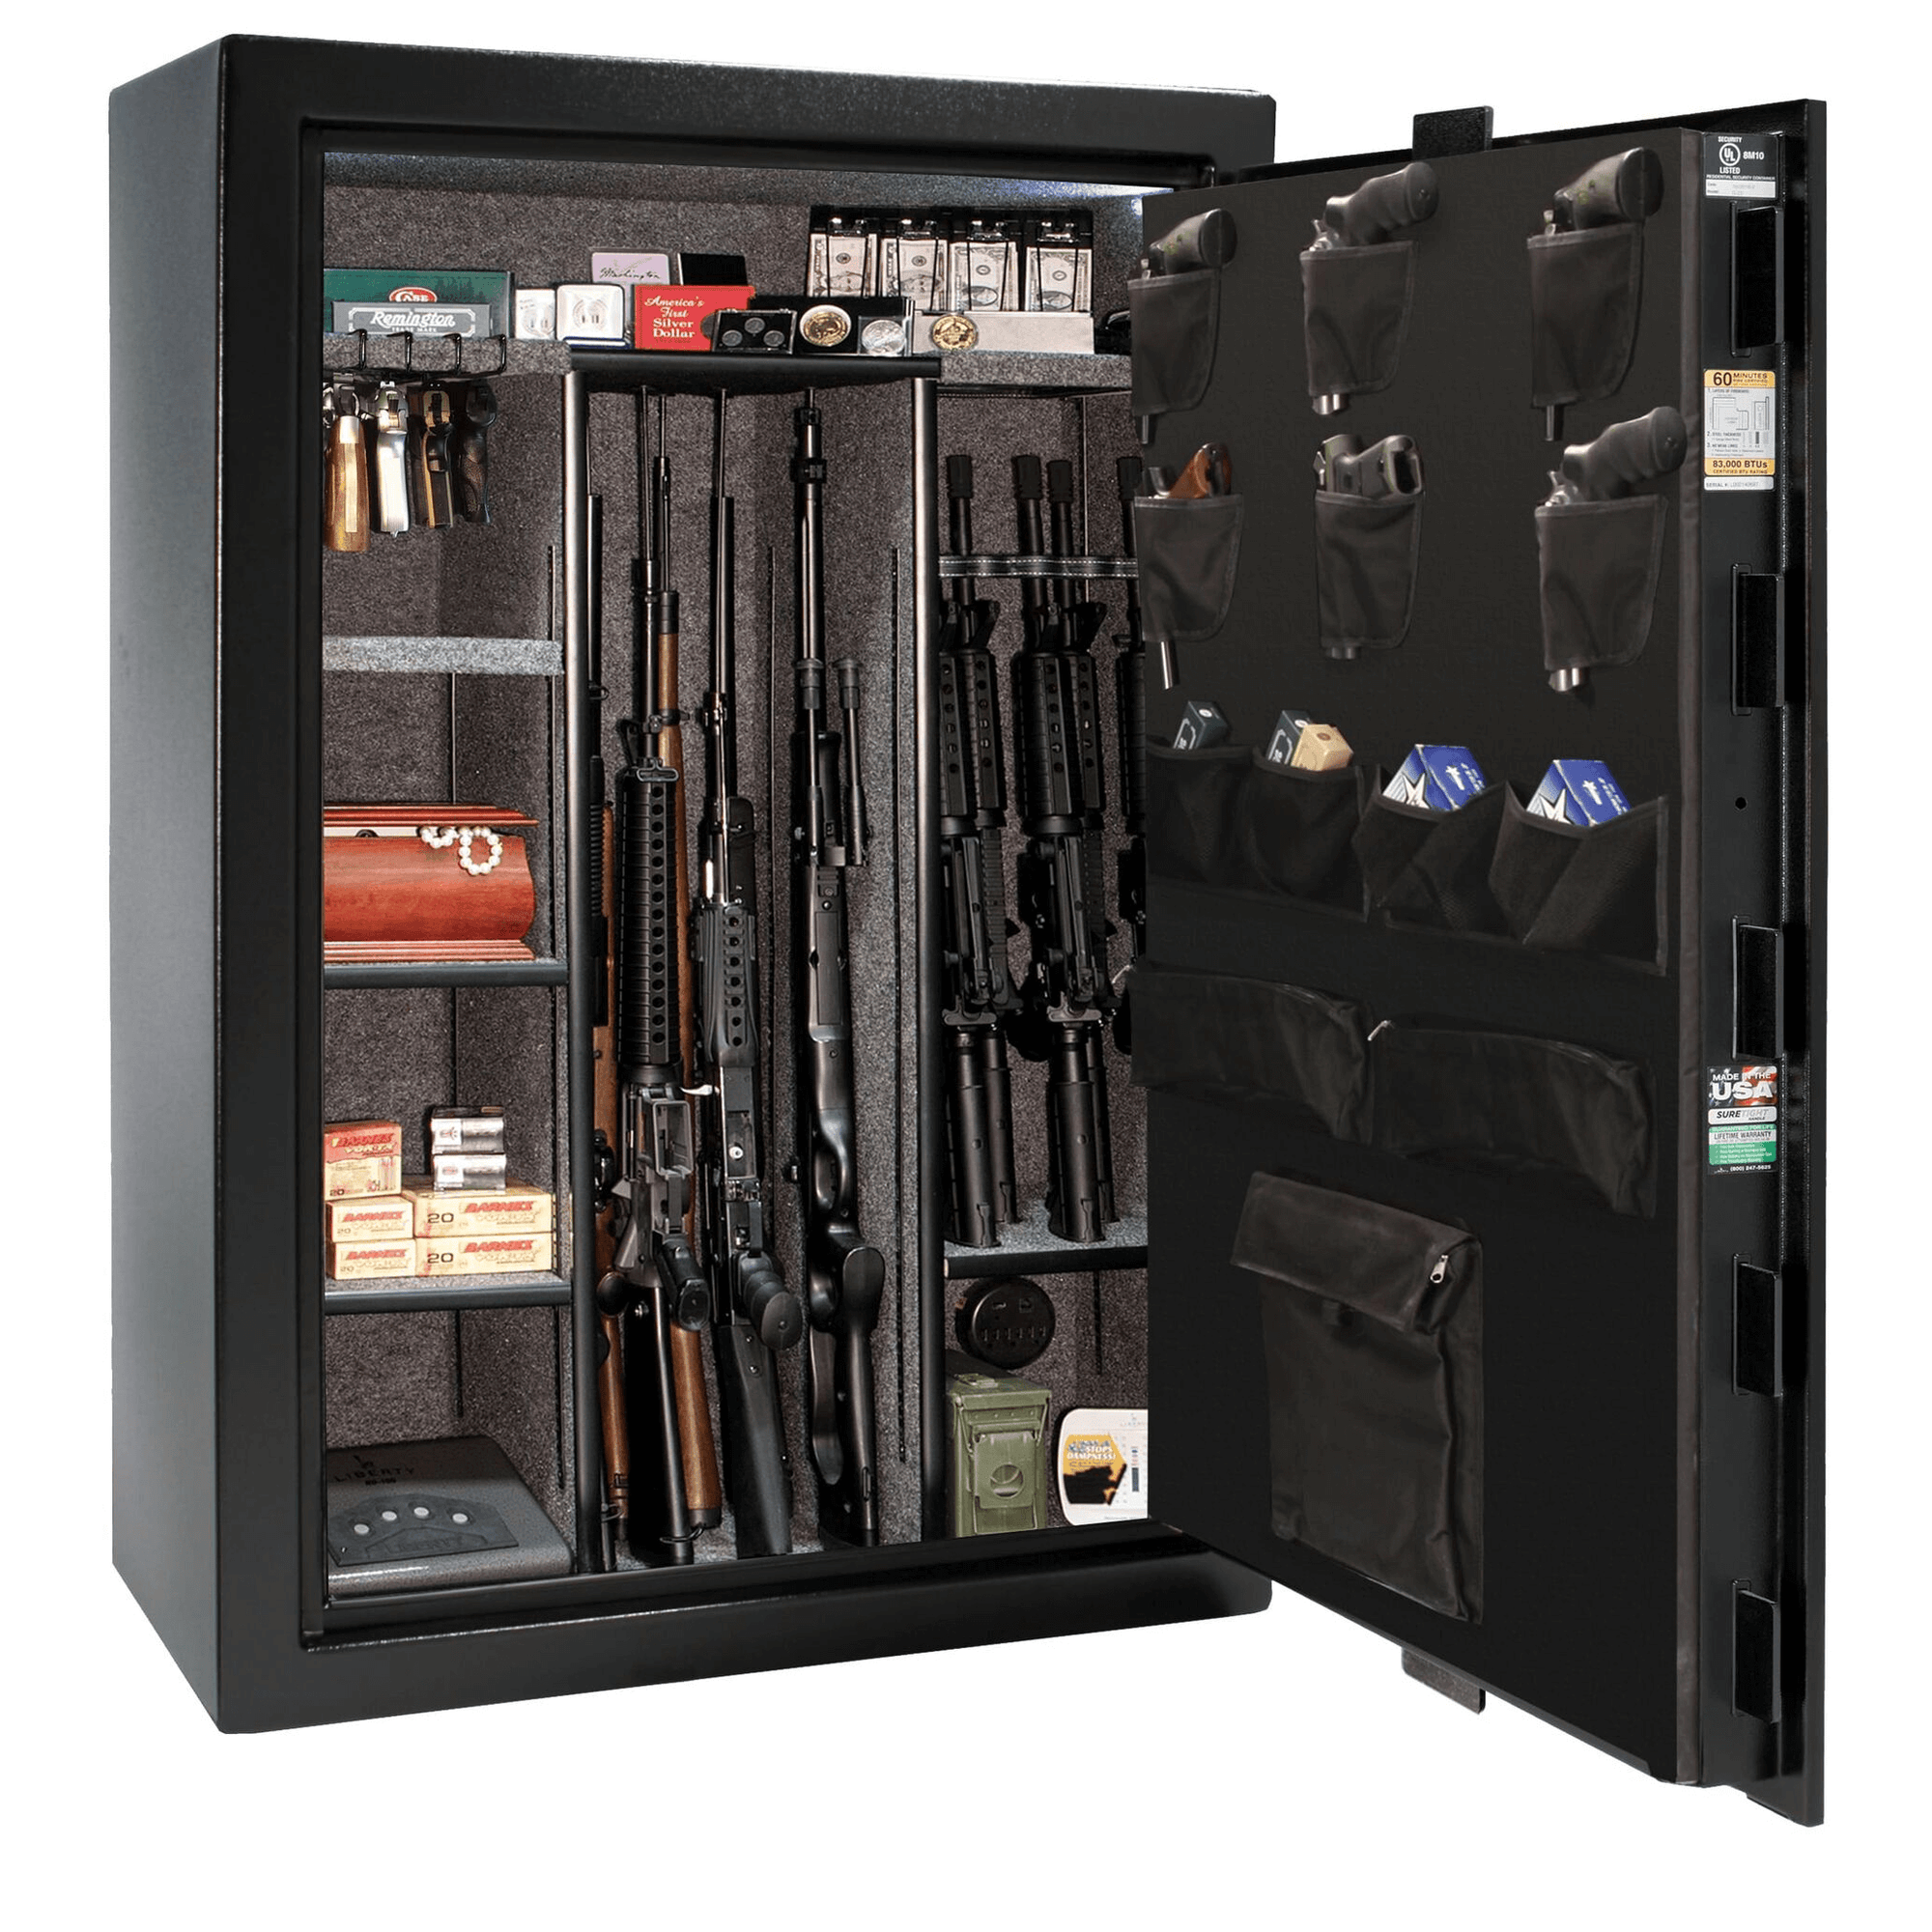 Fatboy Jr. Series | Level 3 Security | 75 Minute Fire Protection | 48XL | Dimensions: 60.5"(H) x 42"(W) x 32"(D) | Up to 64 Long Guns | Black Textured | Electronic Lock